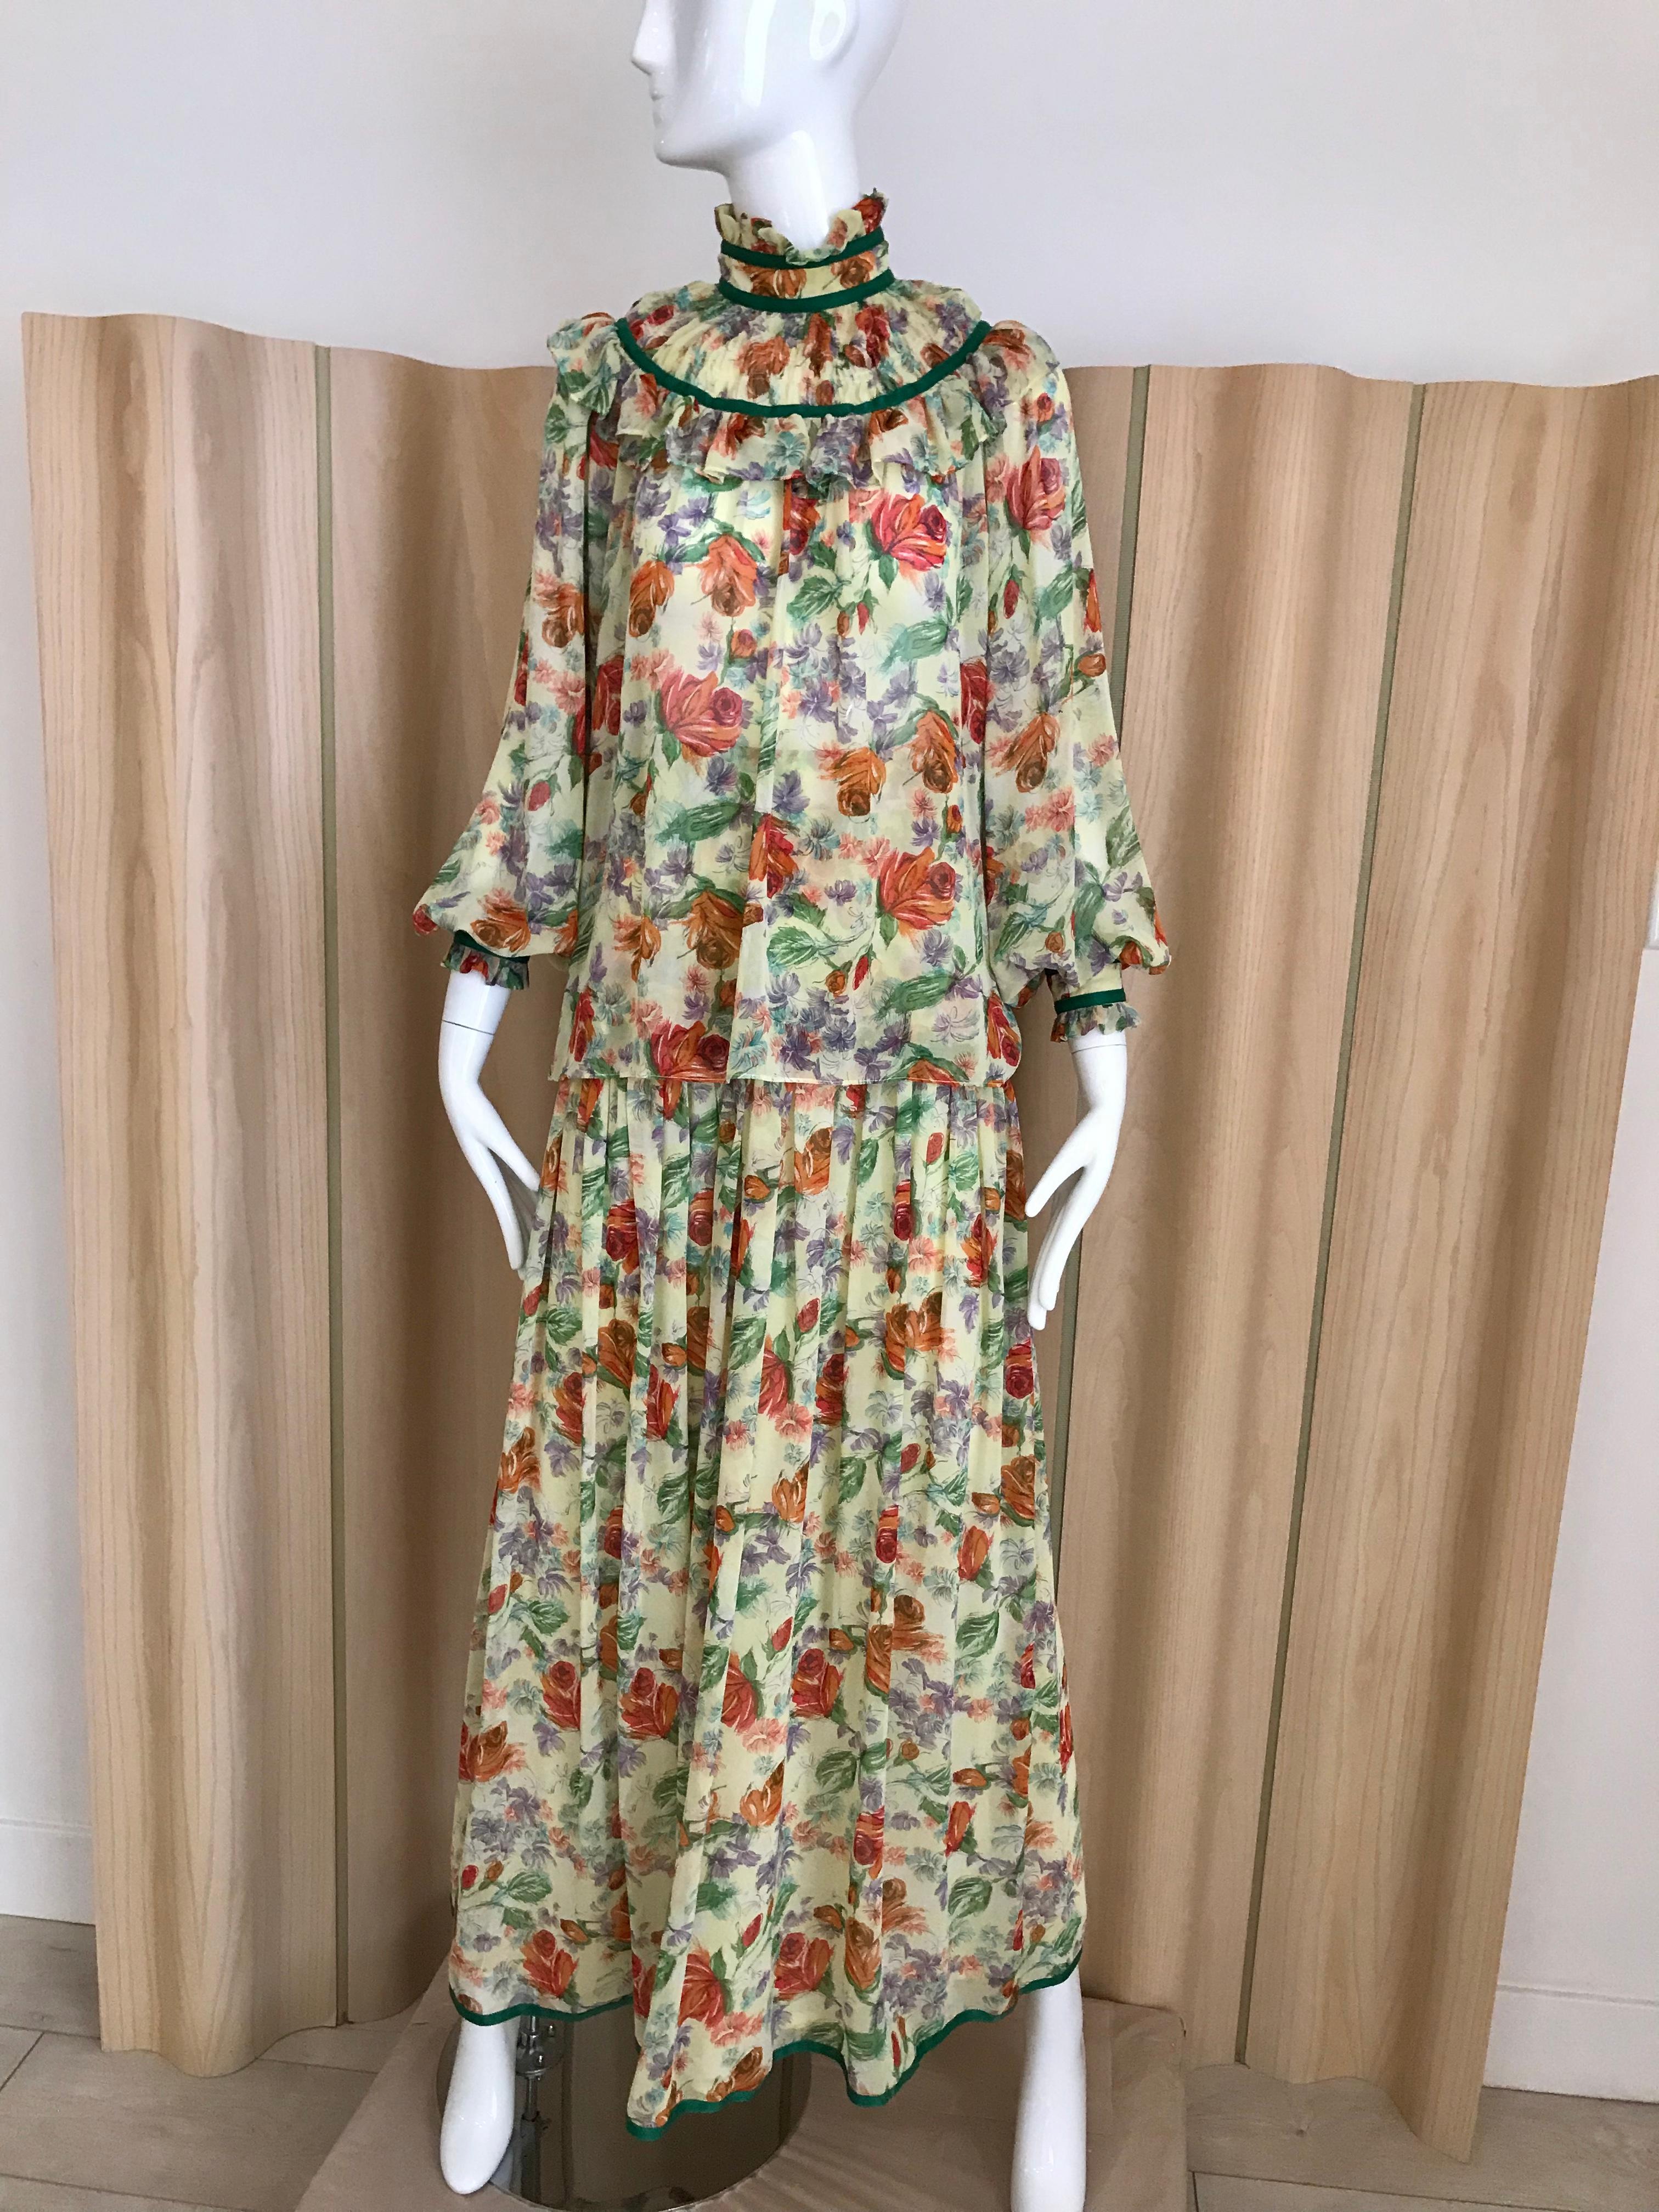 Beautiful 70s crepe multi color floral print long sleeve blouse with maxi skirt set.
Blouse fit size 6-8 
Skirt waist is 26 inches. 